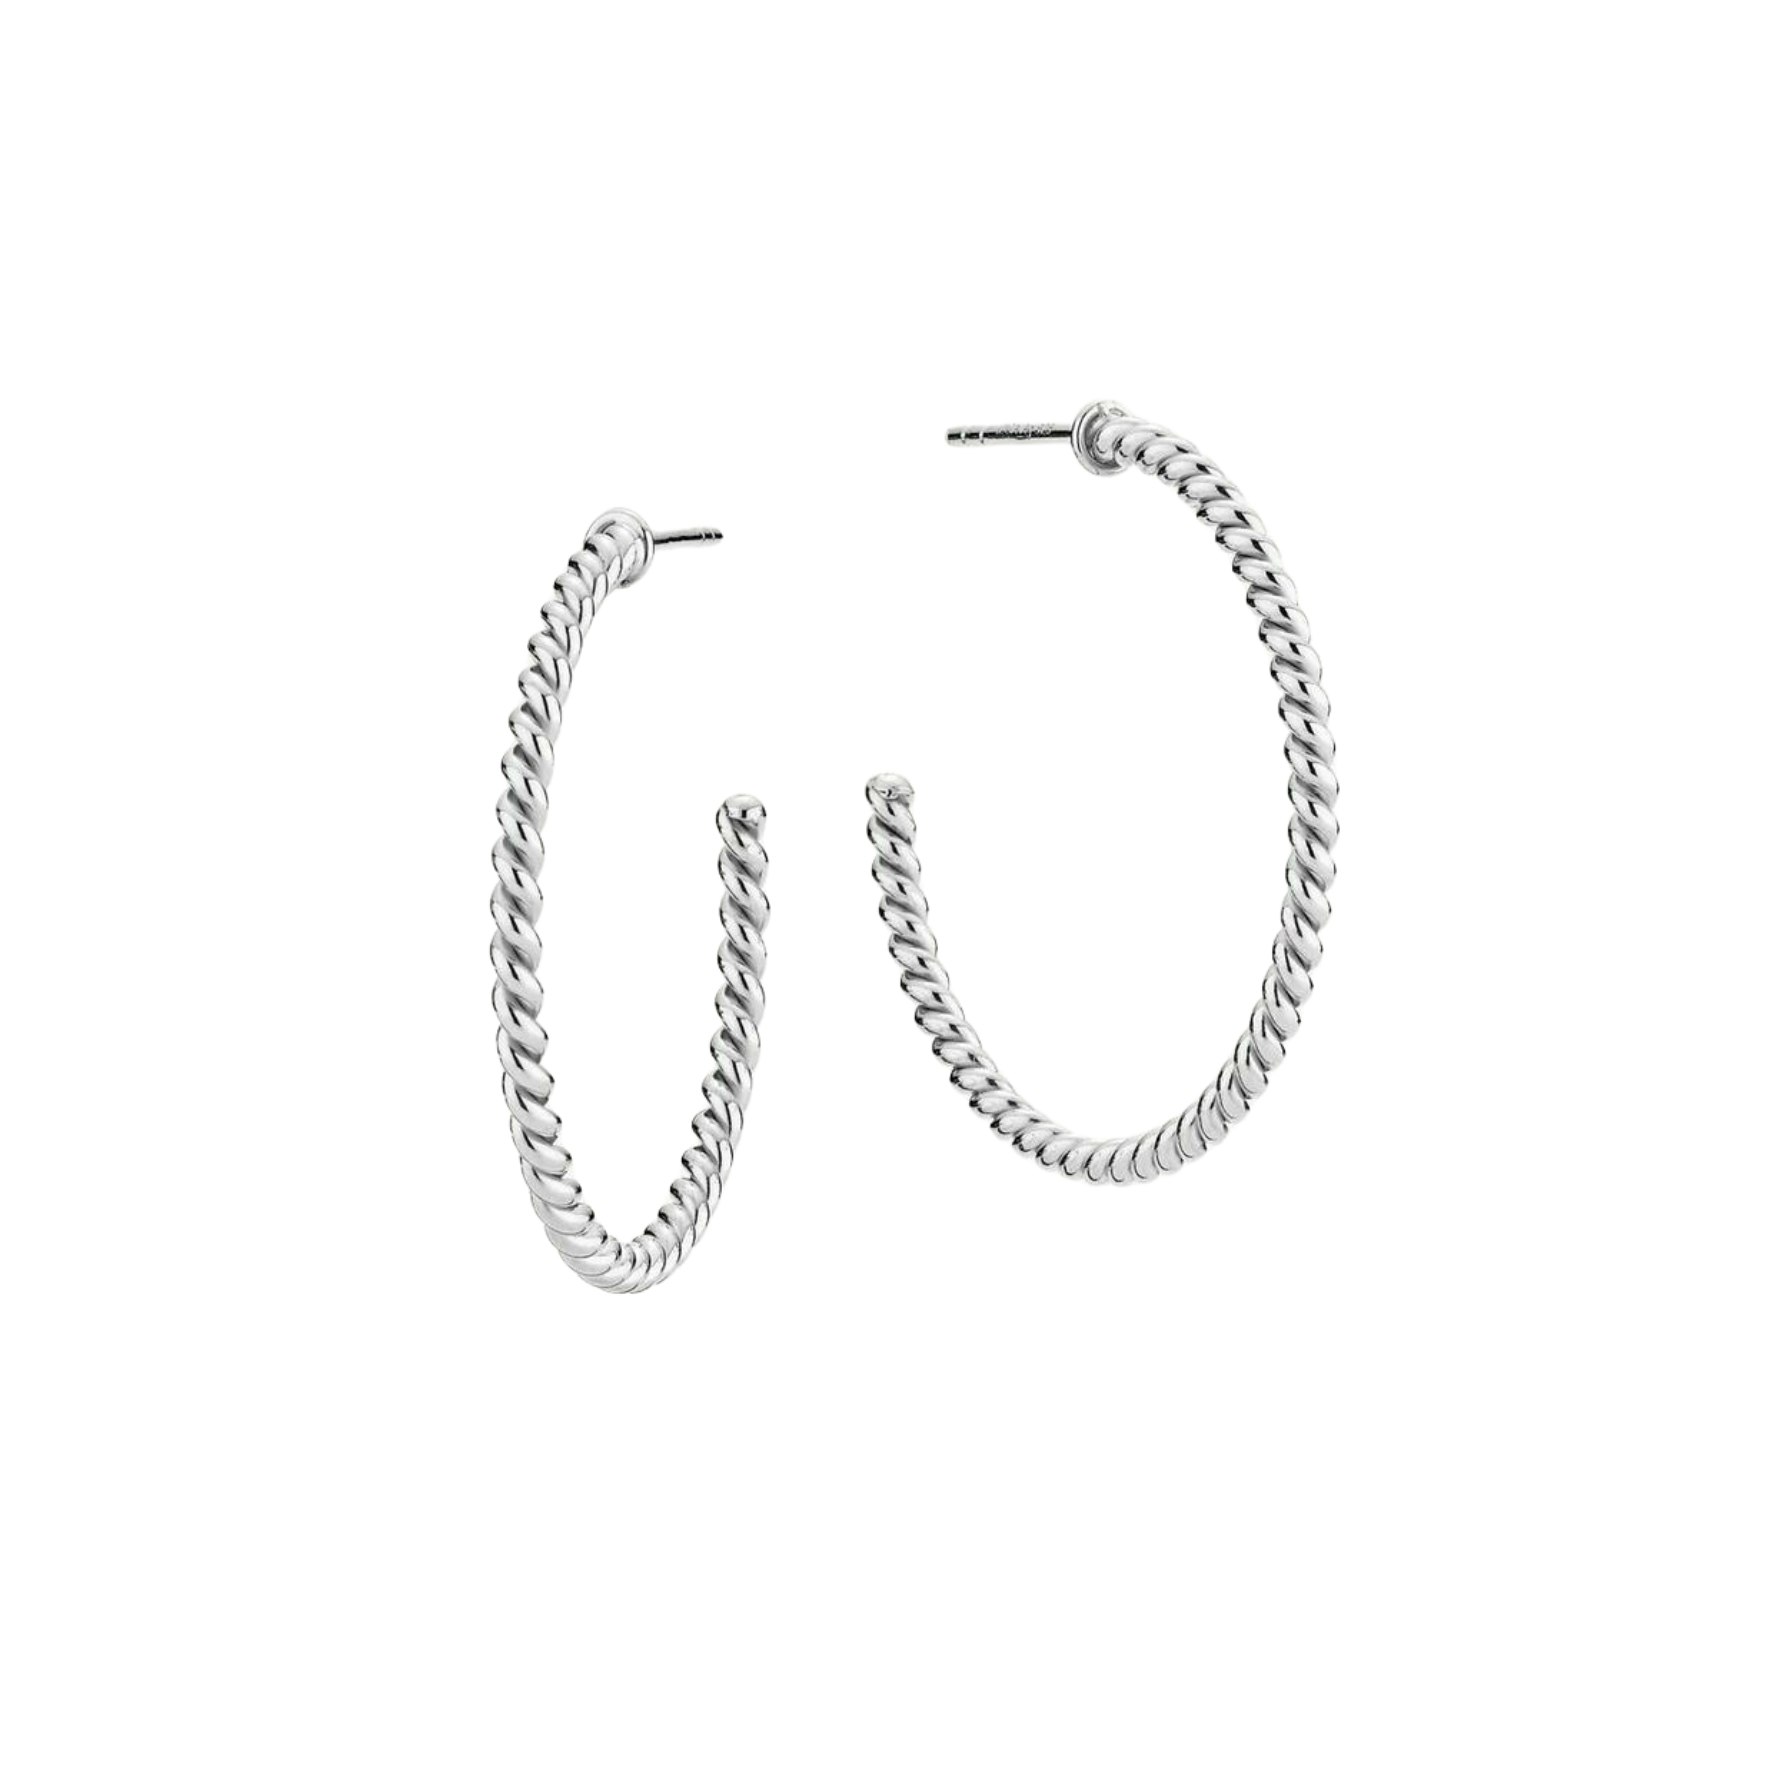 Alessia Large Hoops von Izabel Camille in Silber Sterling 925